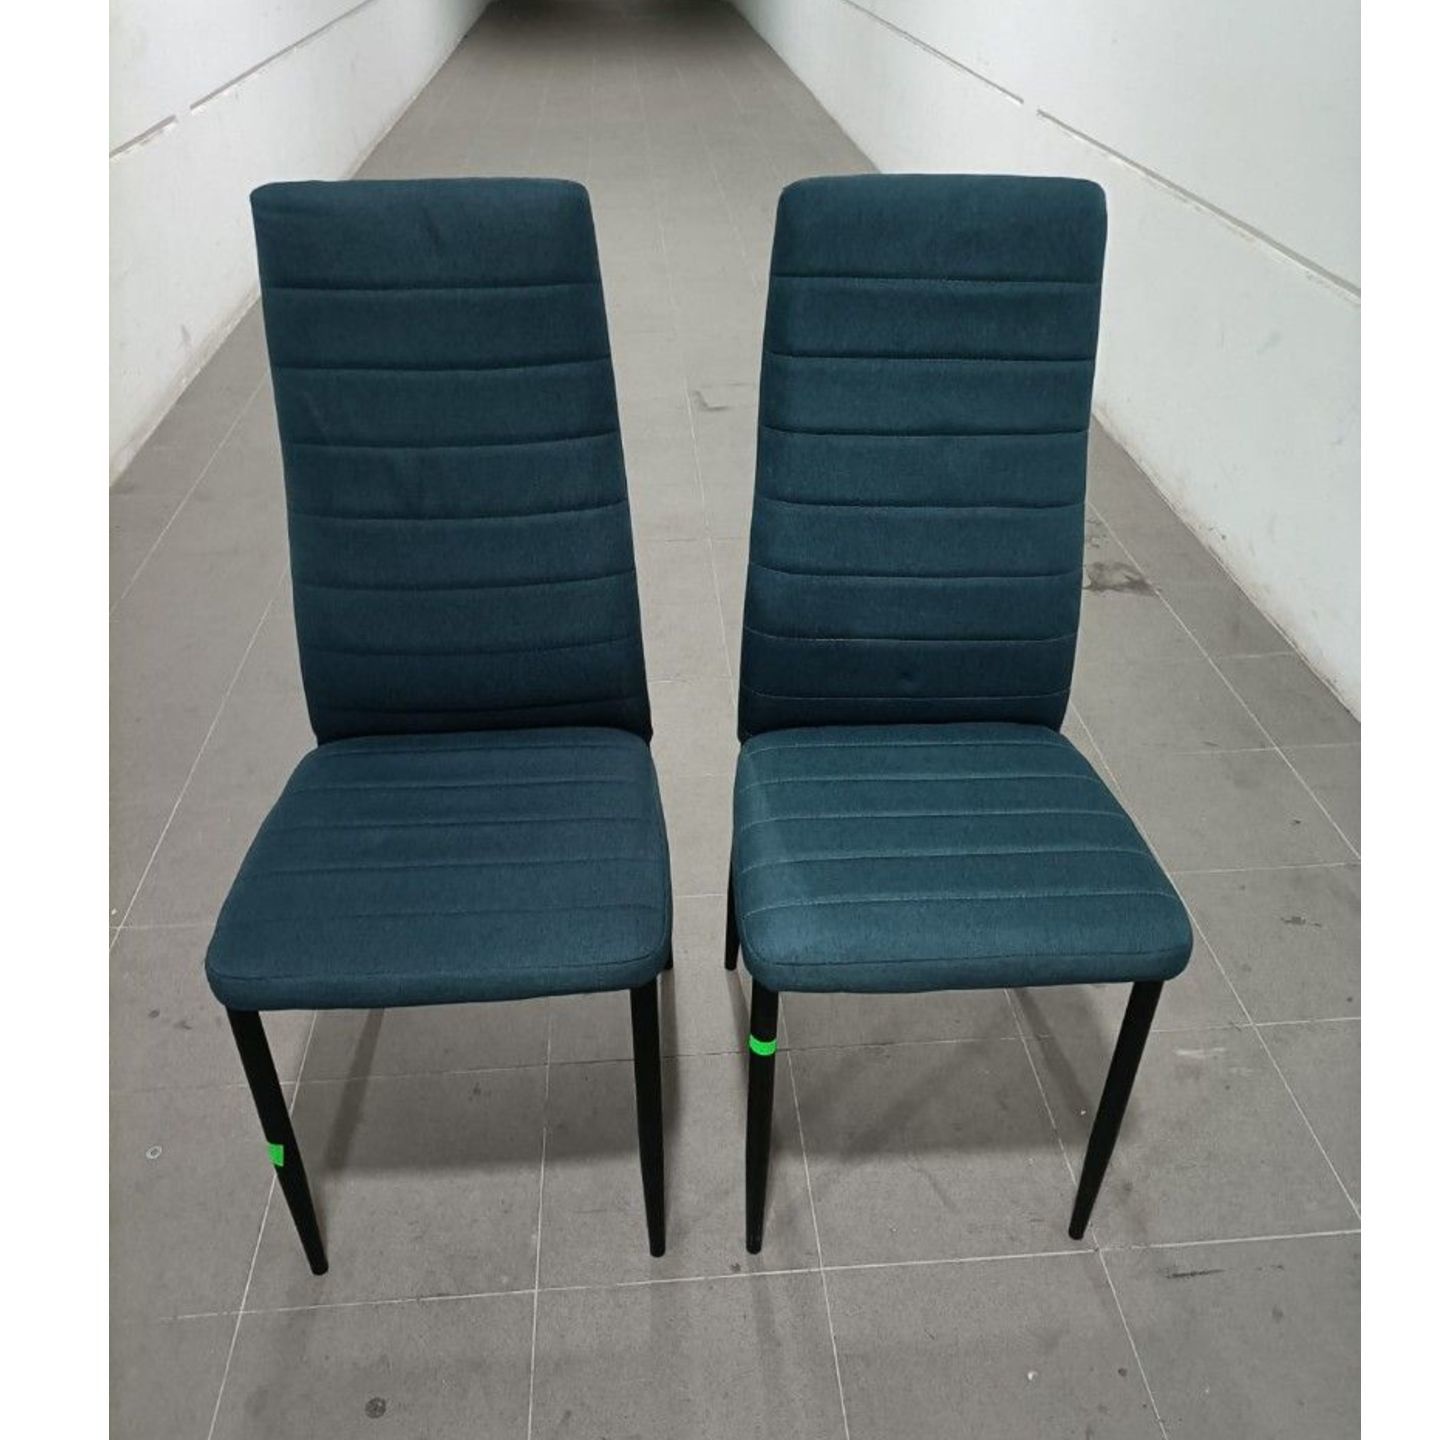 2 X HARLE Dining Chairs in BLUE FABRIC